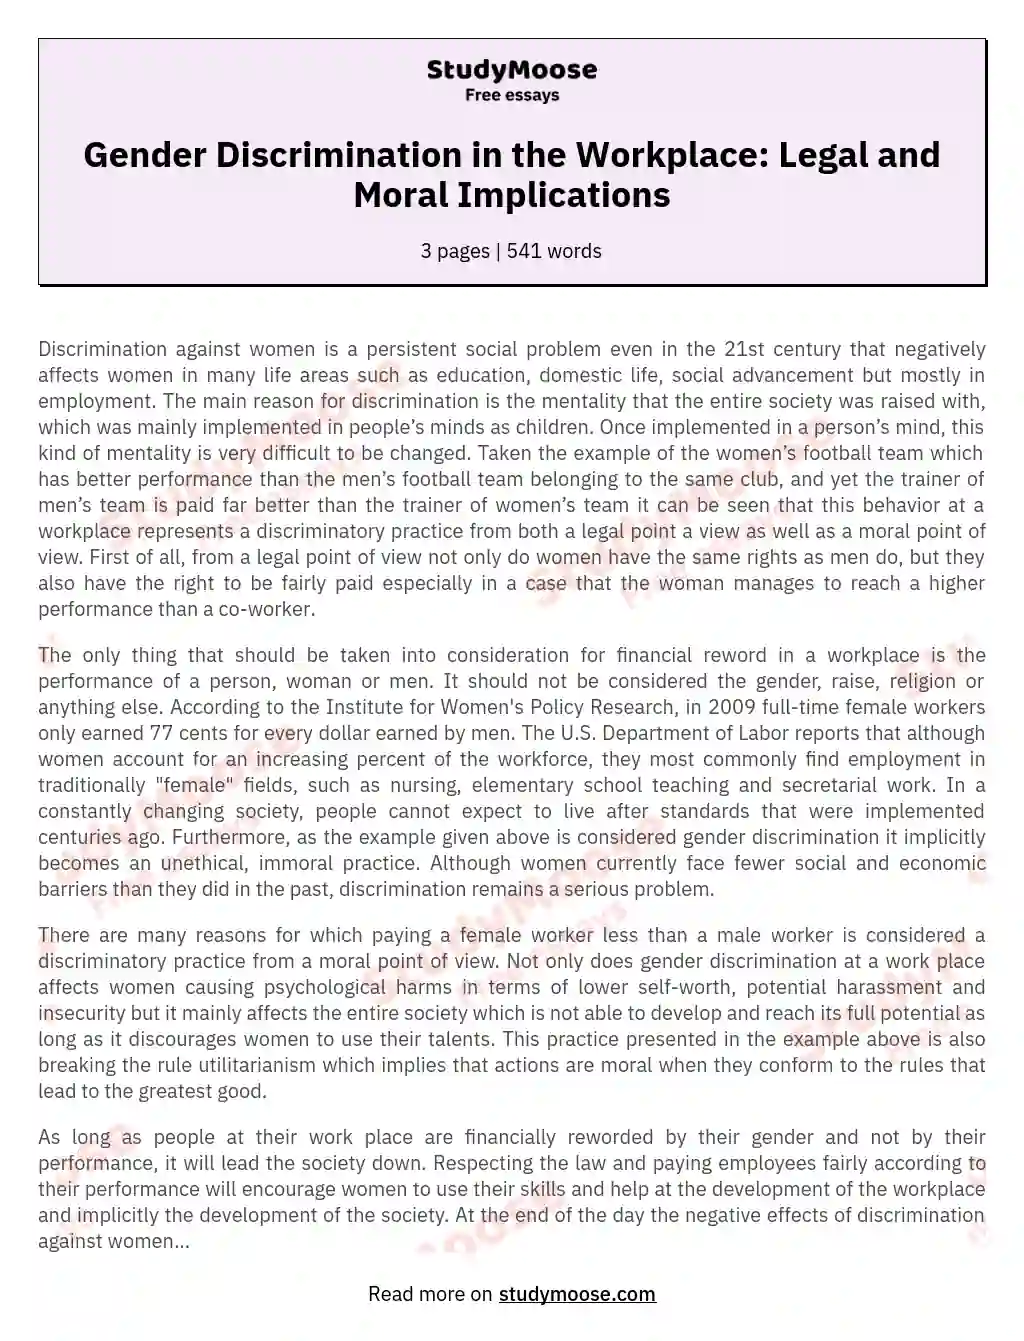 Gender Discrimination in the Workplace: Legal and Moral Implications essay